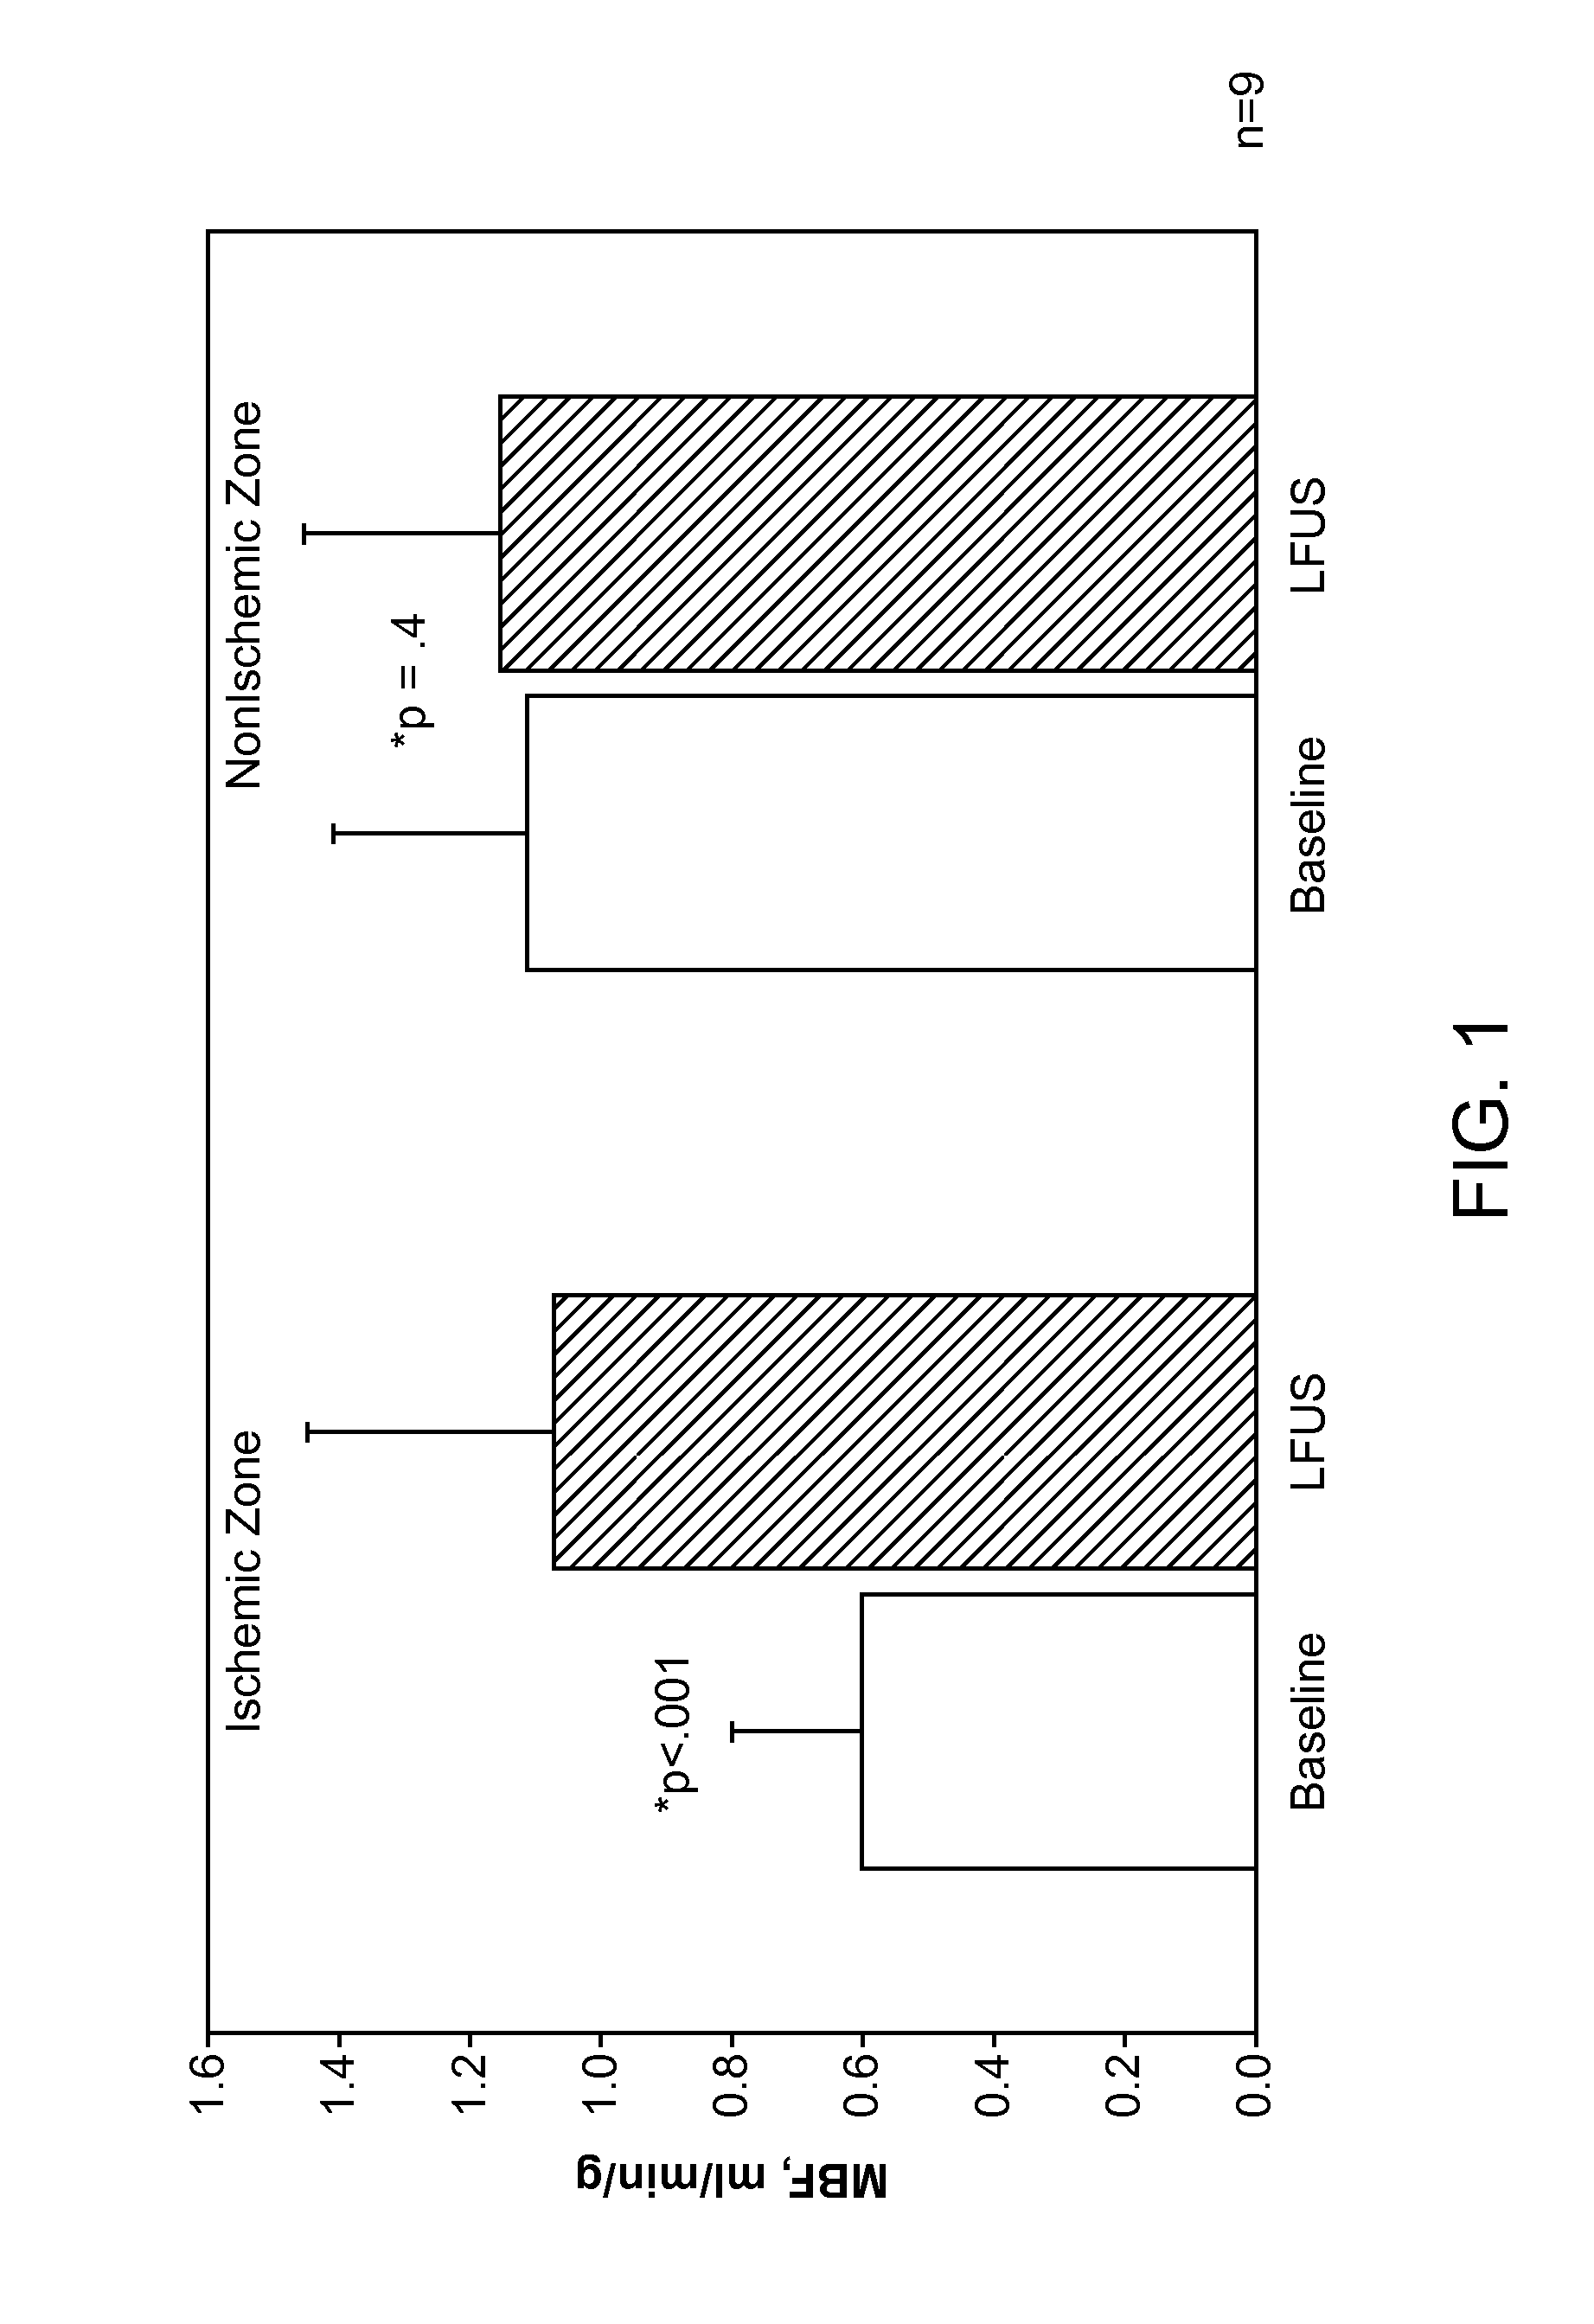 Macro/Micro Duty Cycle Devices, Systems, and Methods Employing Low-Frequency Ultrasound or Other Cyclical Pressure Energies